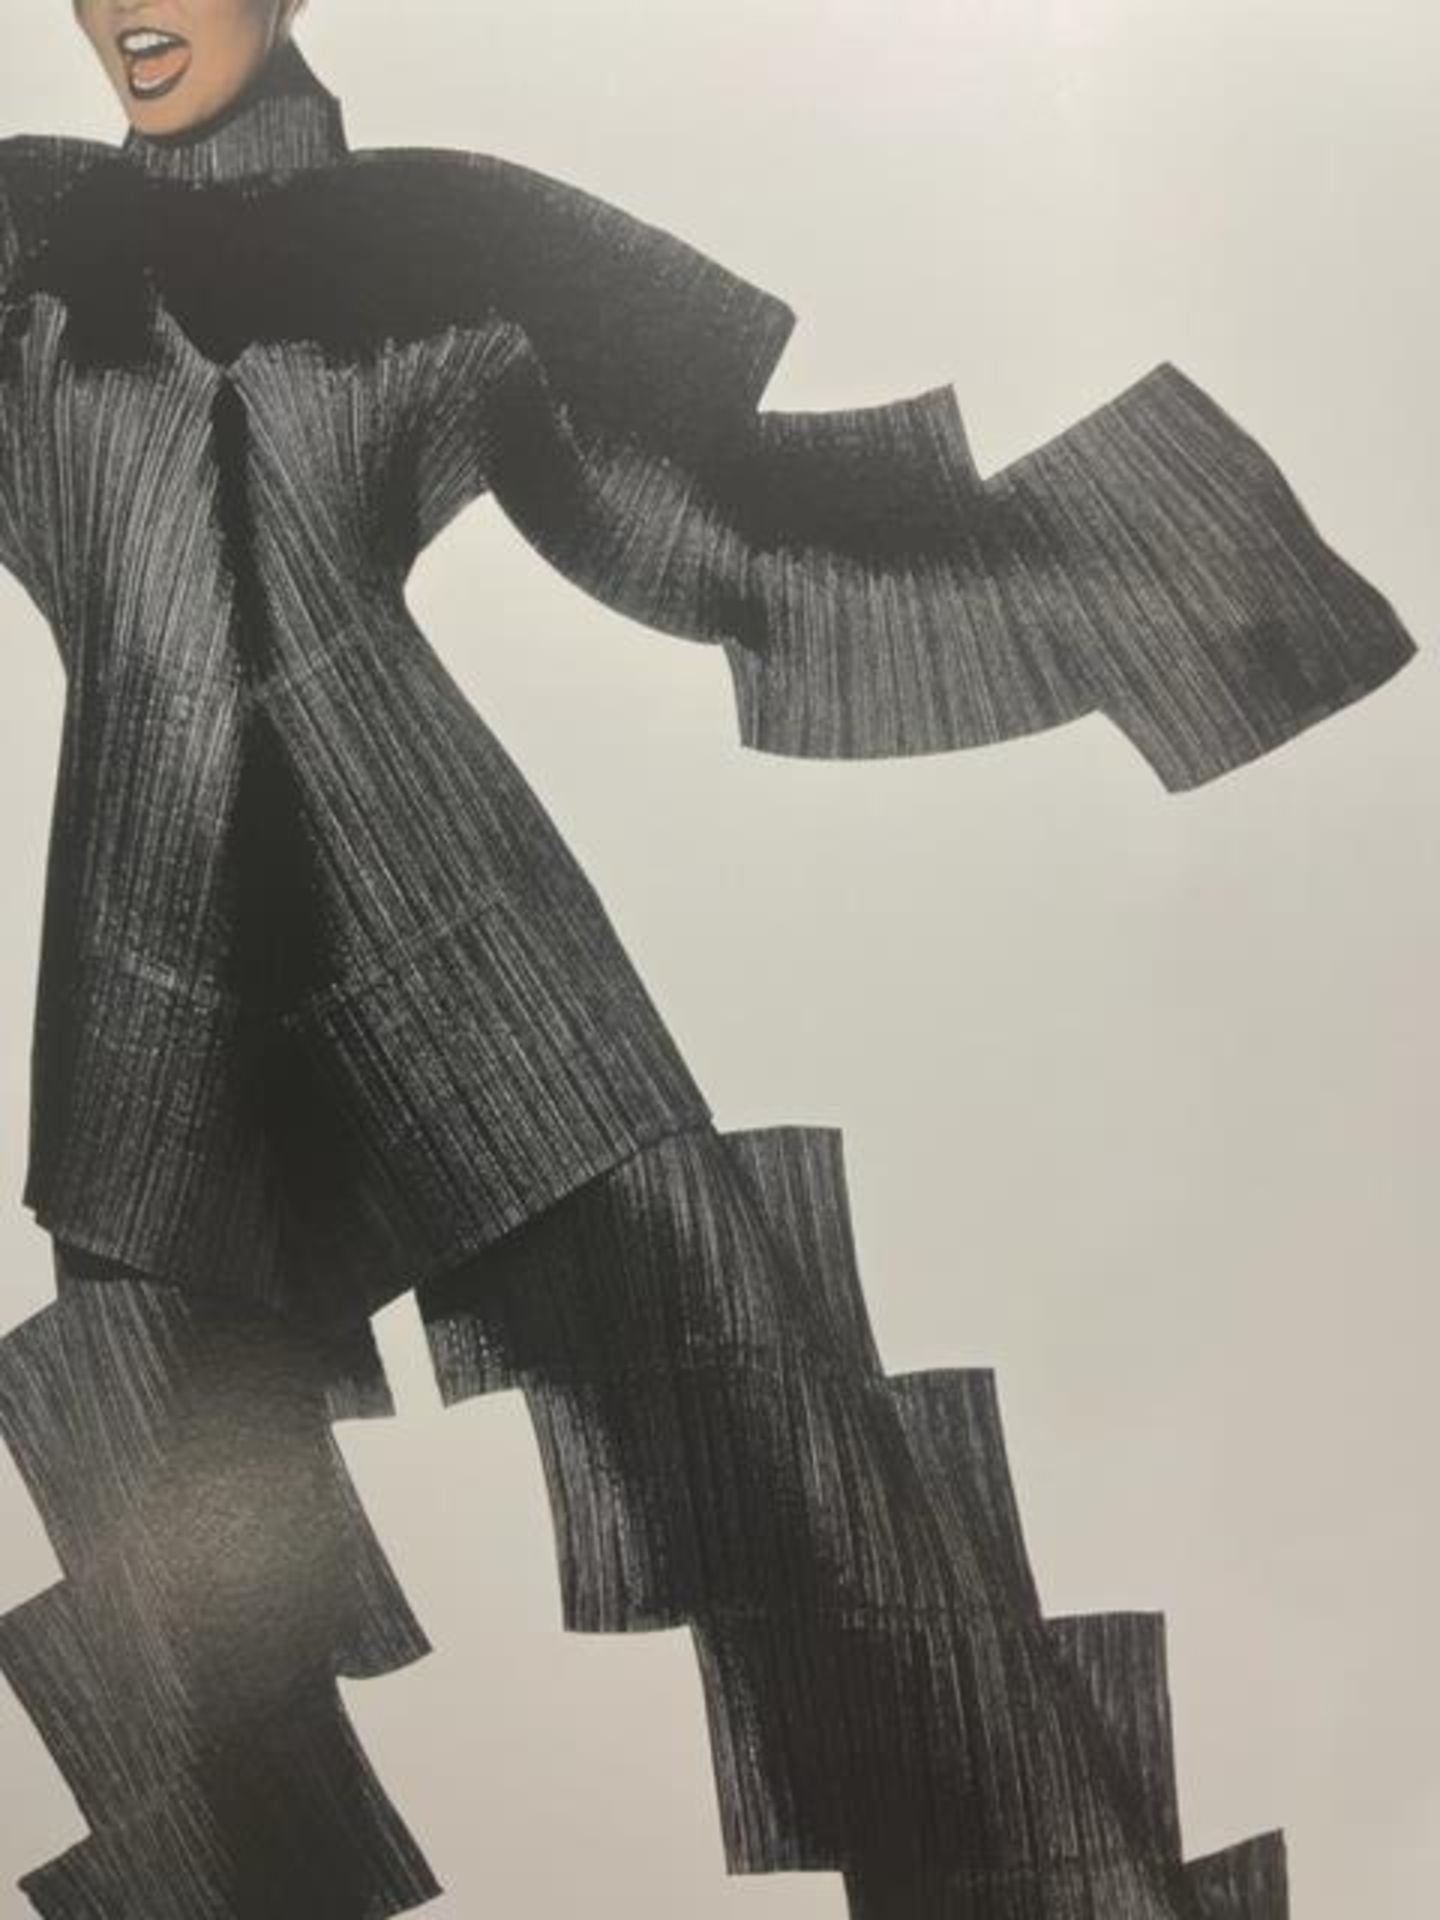 Irving Penn "Staircase Pleats" Print. - Image 5 of 6